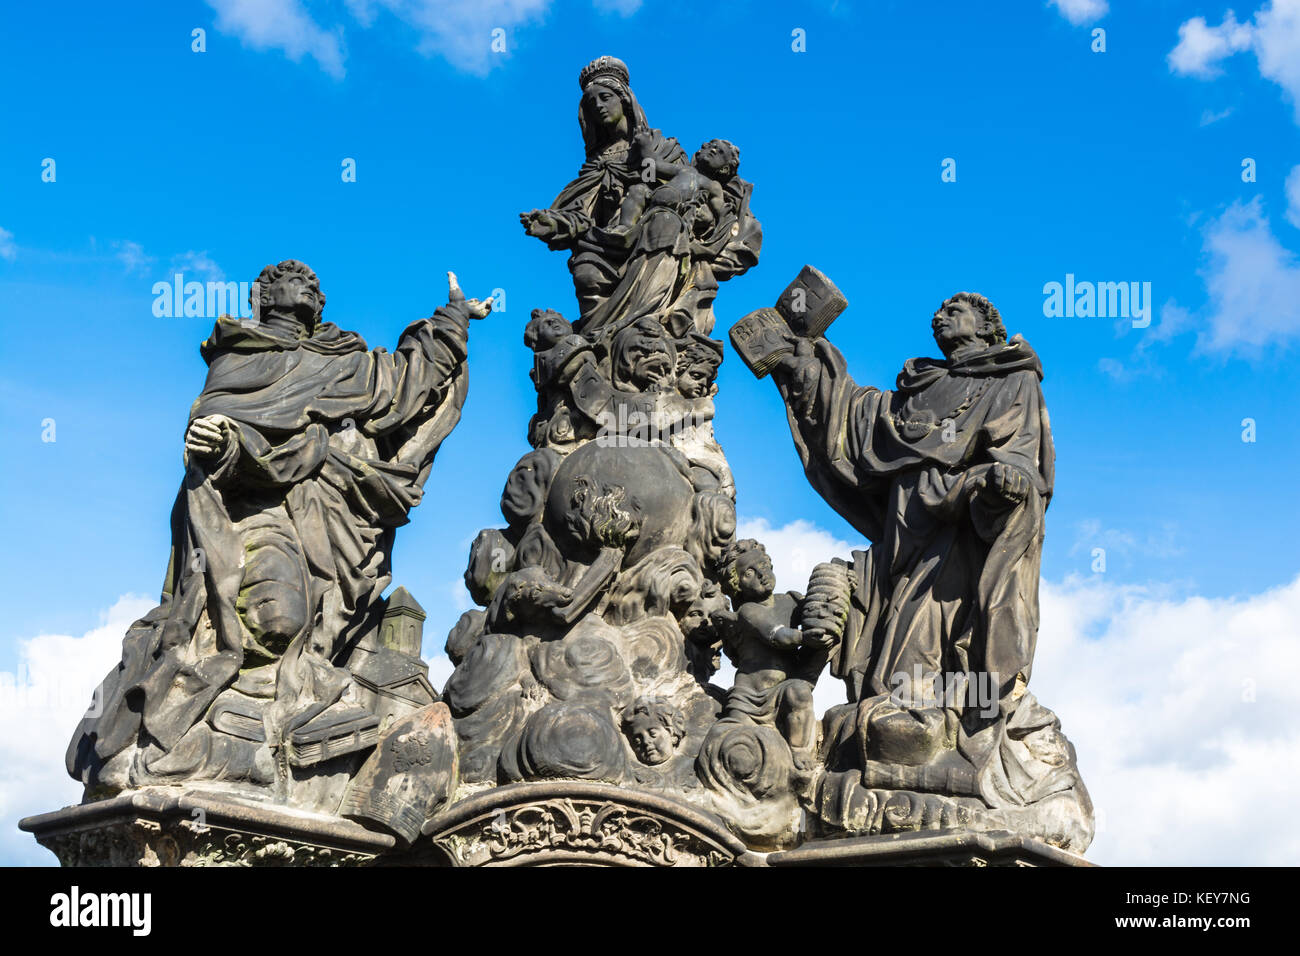 Prague, Czech Republic: Statues of Madonna, Saint Dominic and Thomas Aquinas, outdoor sculptures by Matej Vaclav Jackel on the north side of Charles B Stock Photo